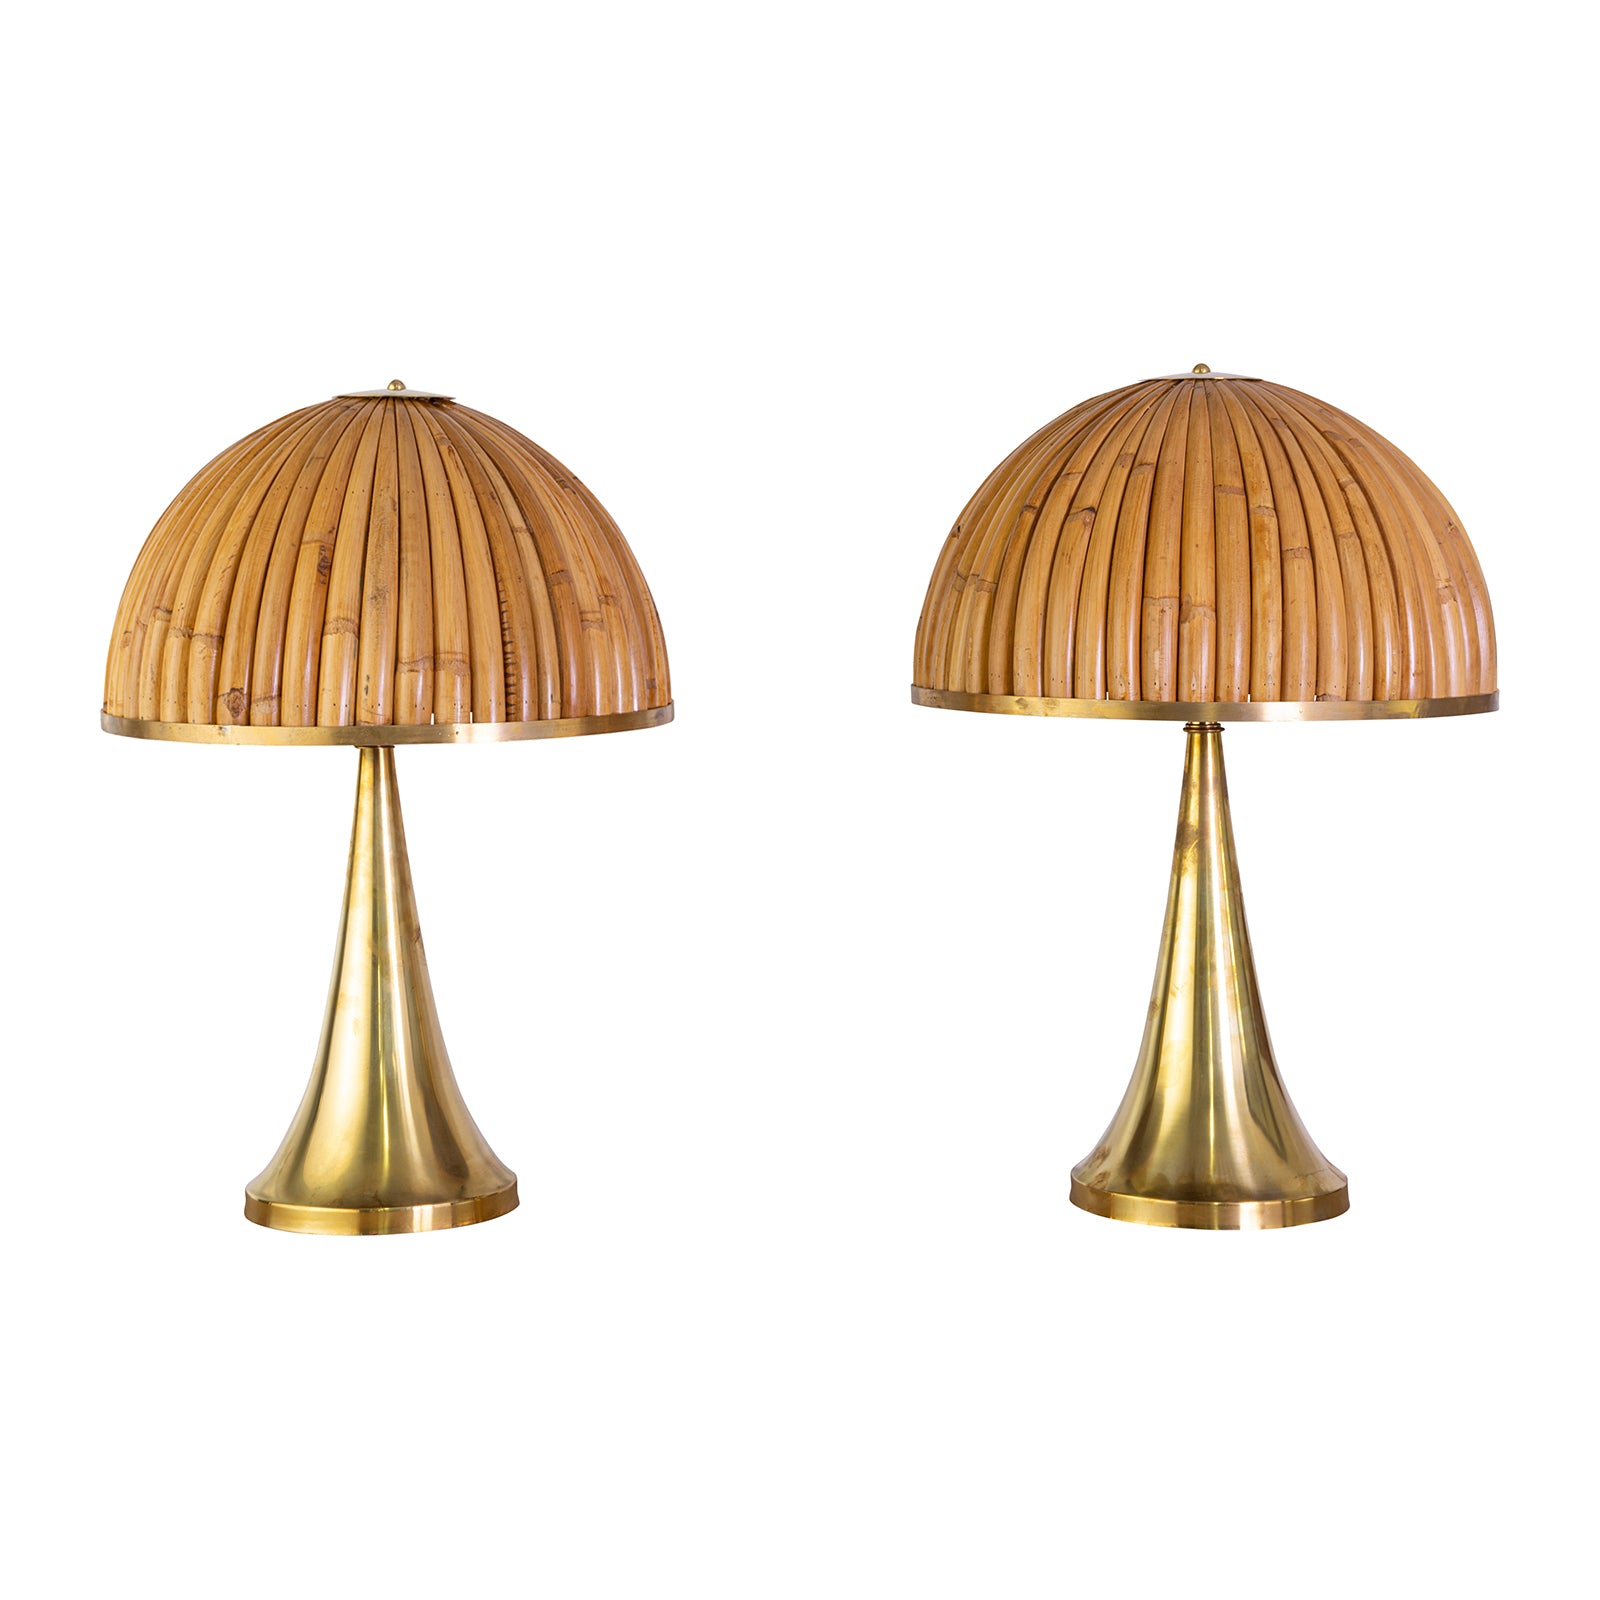 Pair of Table lamps in the manner of Gabrielle Crispi with split Bamboo Shades